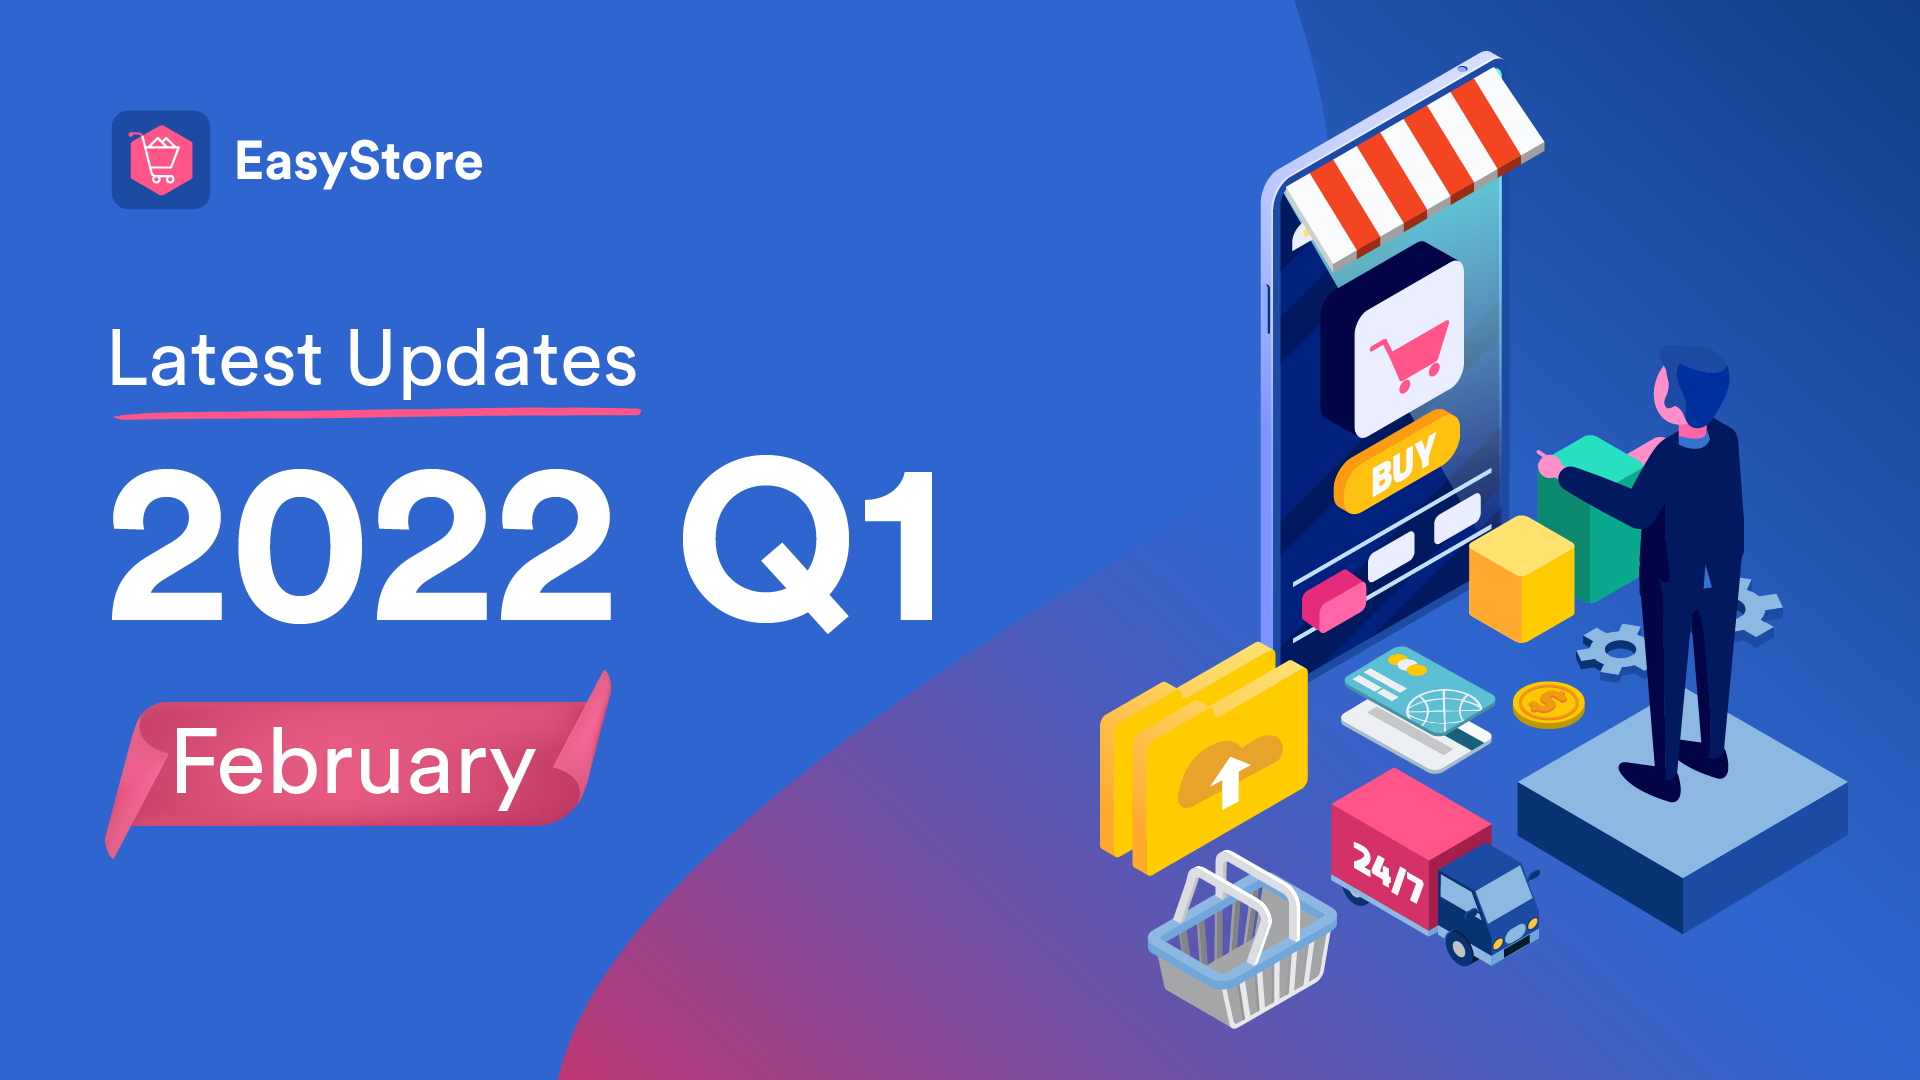 EasyStore Latest Updates: February 2022 | EasyStore